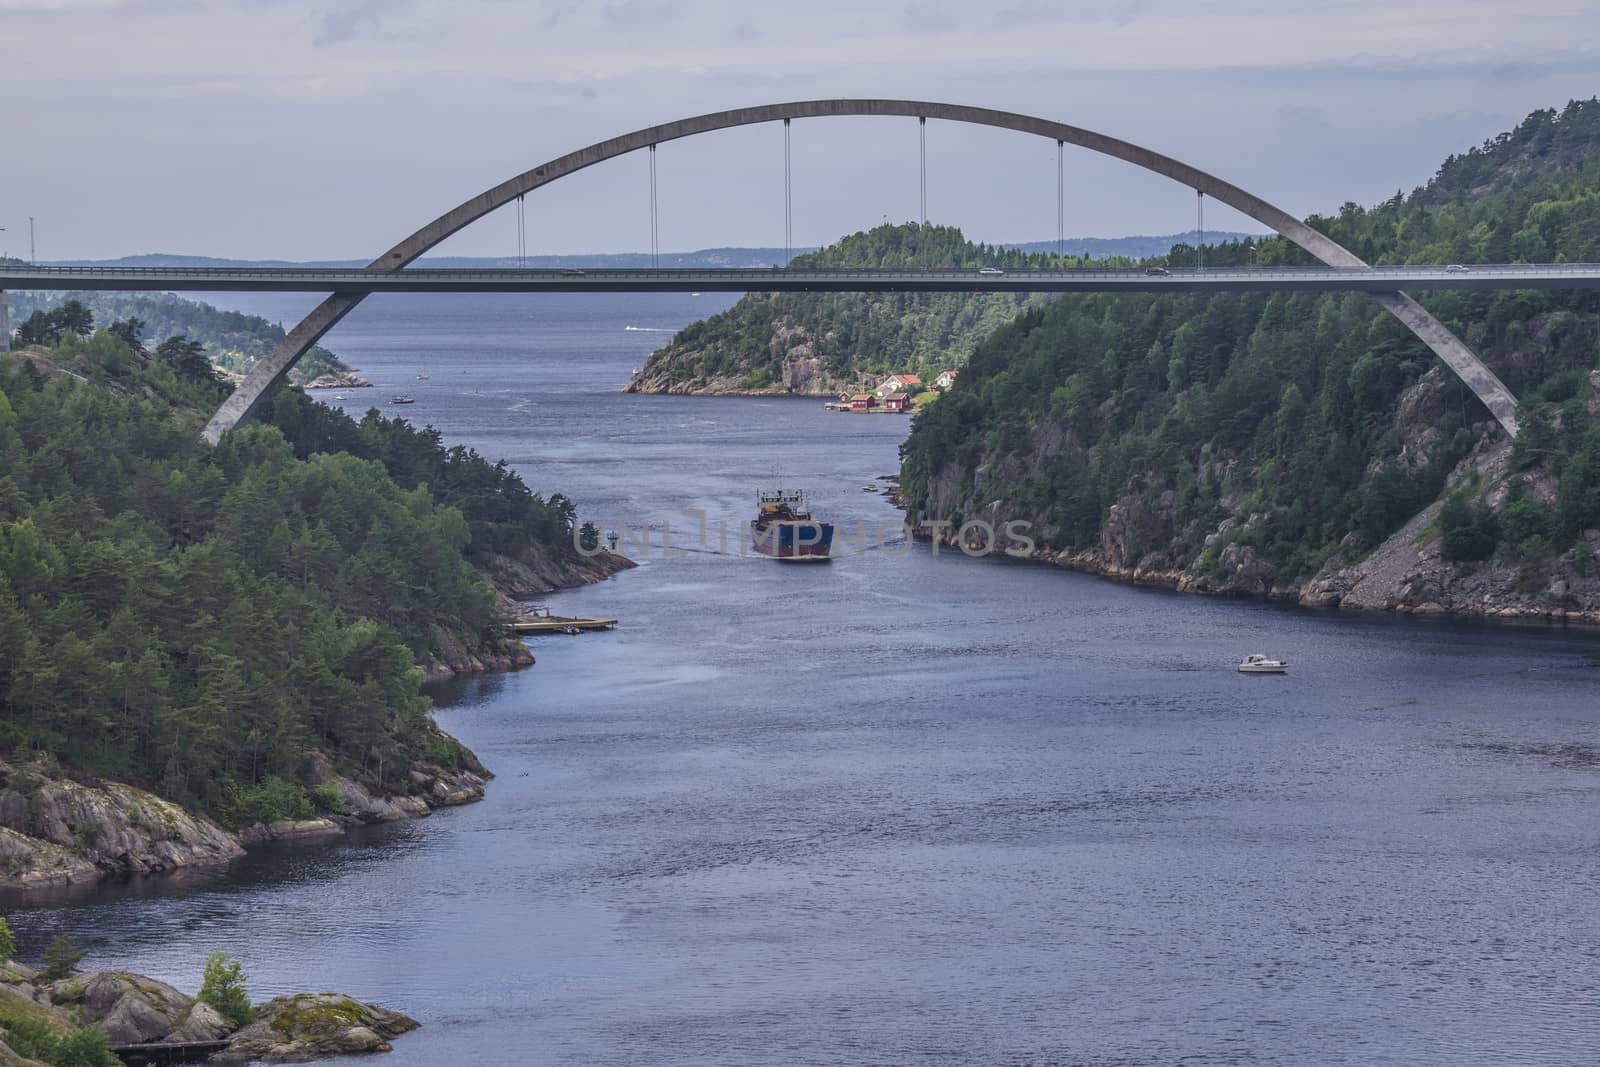 Cargo vessels Bal Bulk going to the port of Halden, Norway in order to unload gravel. The picture is shot from Svinesund Bridge